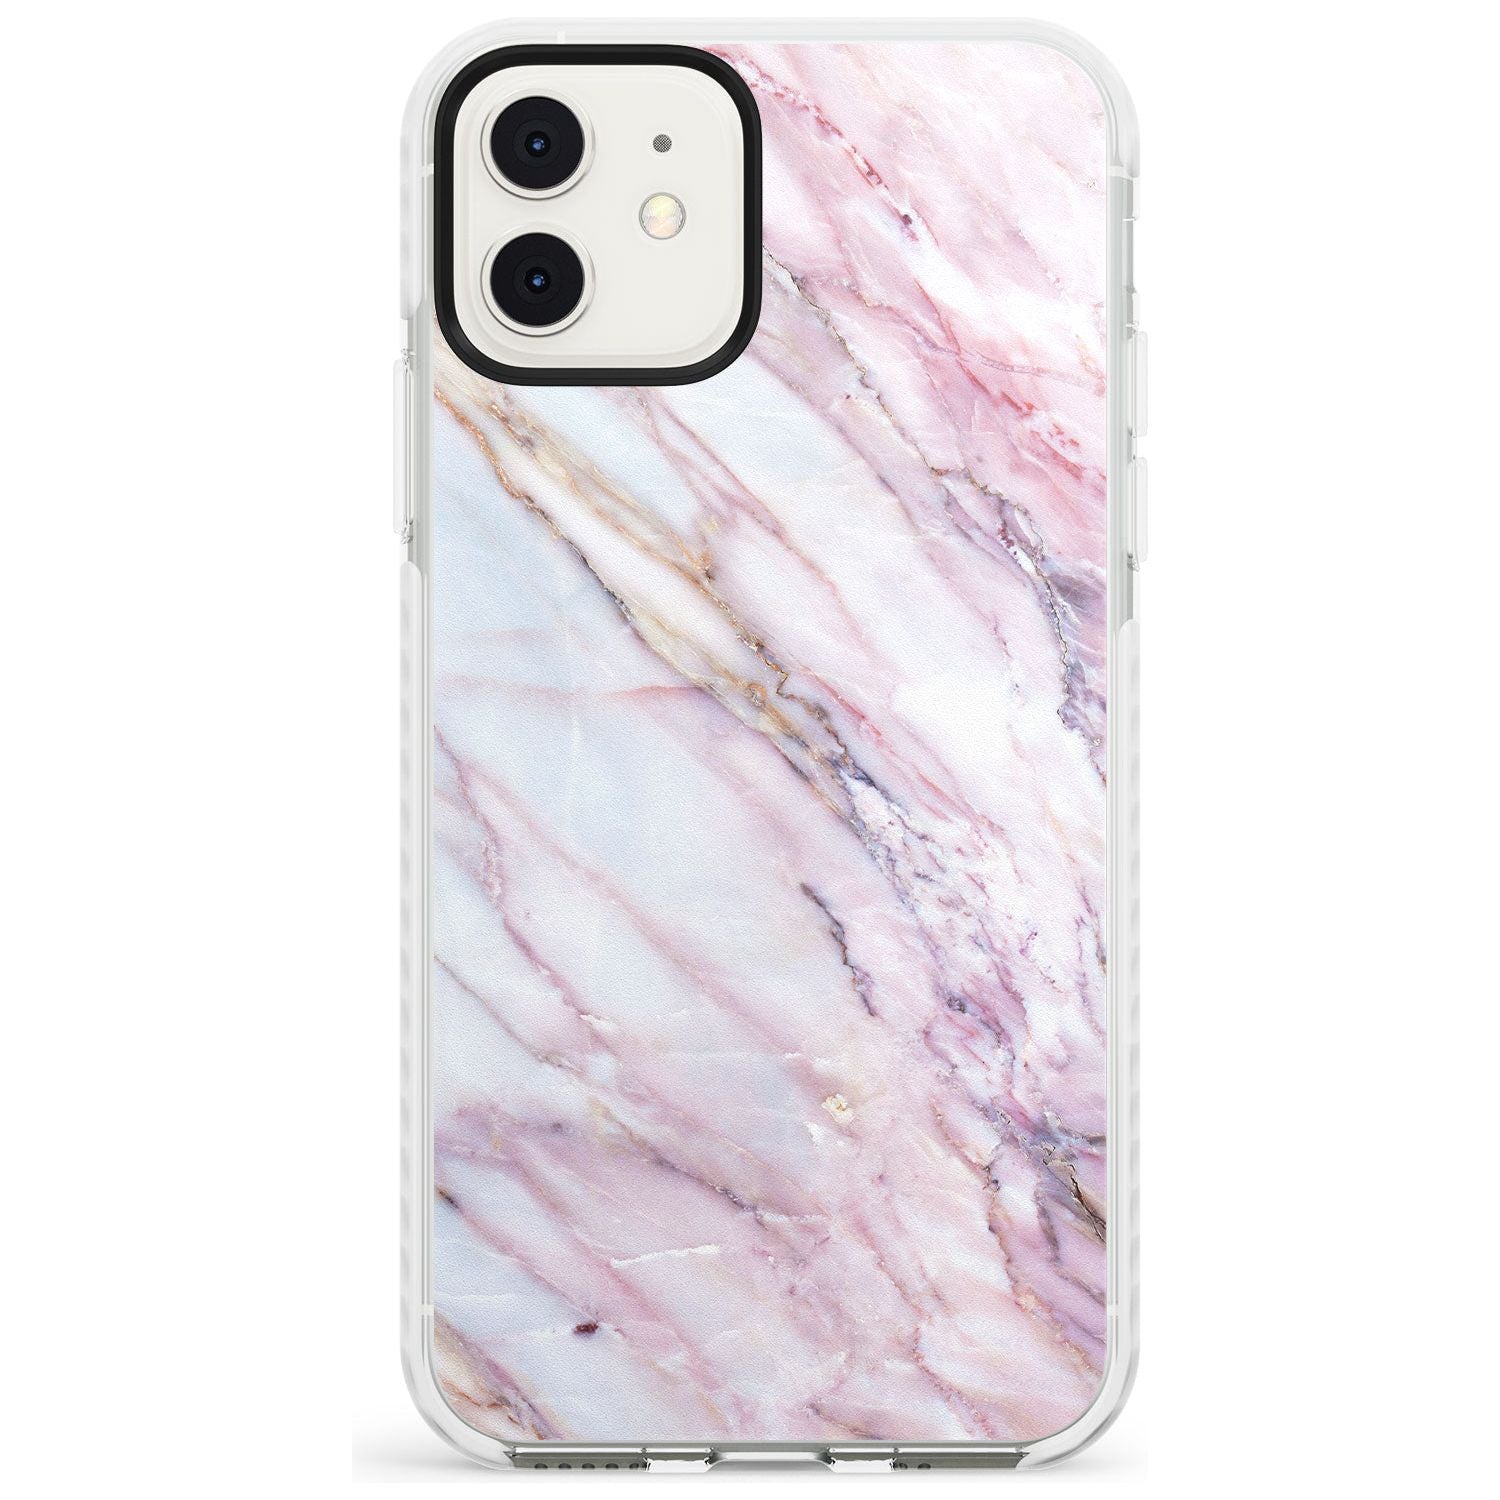 White, Pink & Purple Onyx Marble Texture Slim TPU Phone Case for iPhone 11